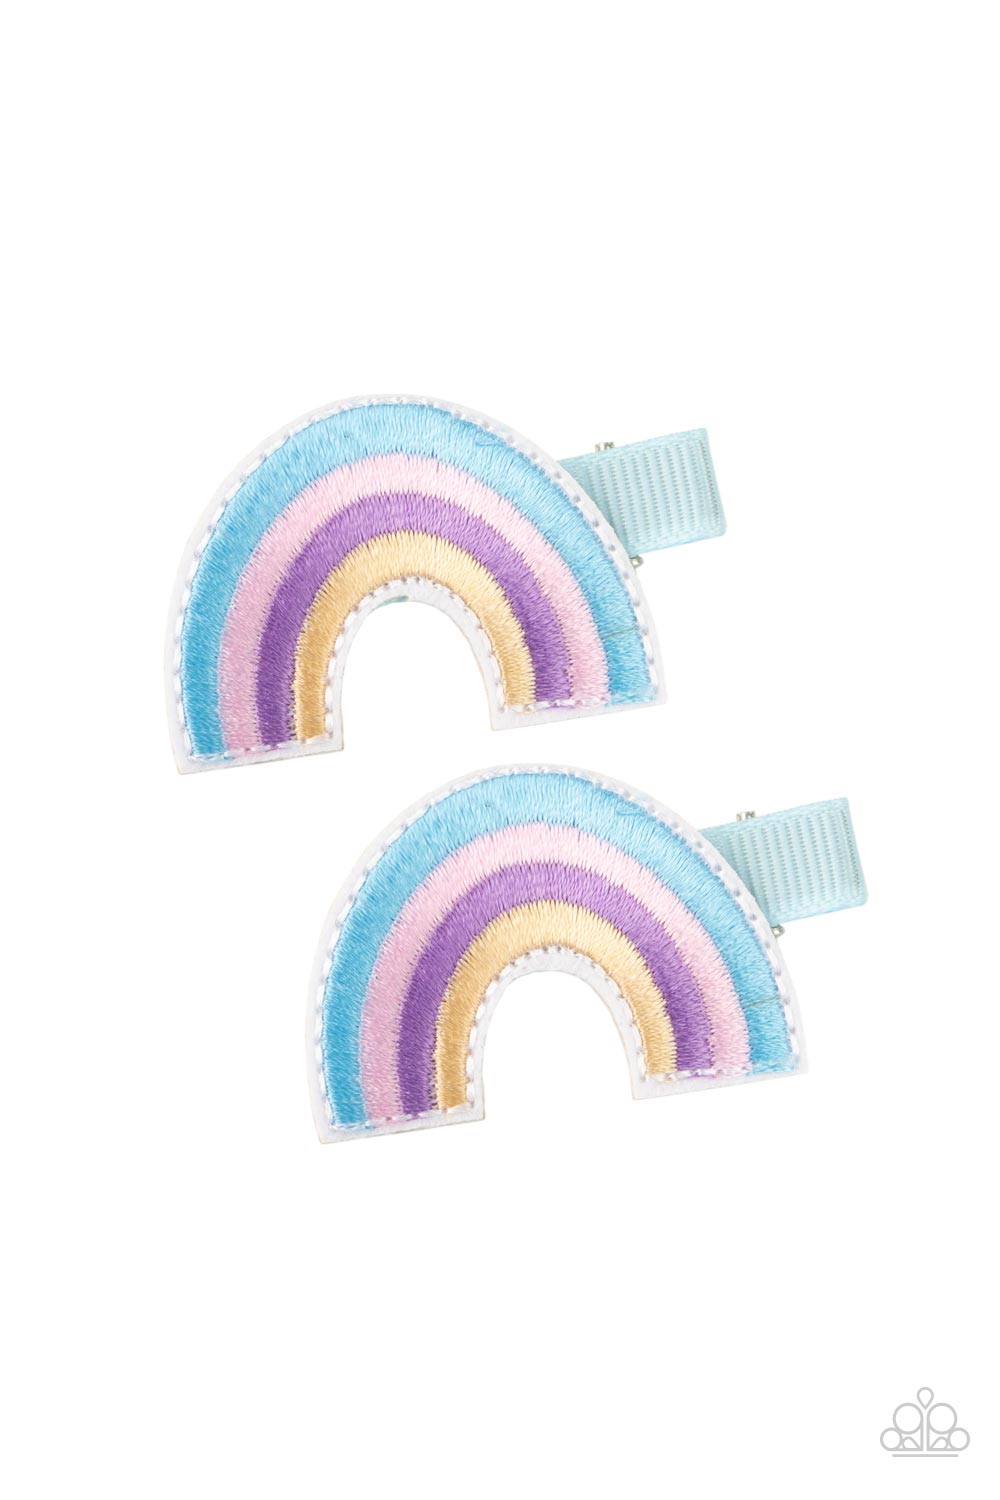 Follow Your Rainbow Blue Hair Clip - Paparazzi Accessories  Blue, pink, purple, and golden threaded rows arc into a magical pair of rainbows. Each rainbow features a standard duck bill hair clip on the back.  All Paparazzi Accessories are lead free and nickel free!  Sold as one pair of hair clips.